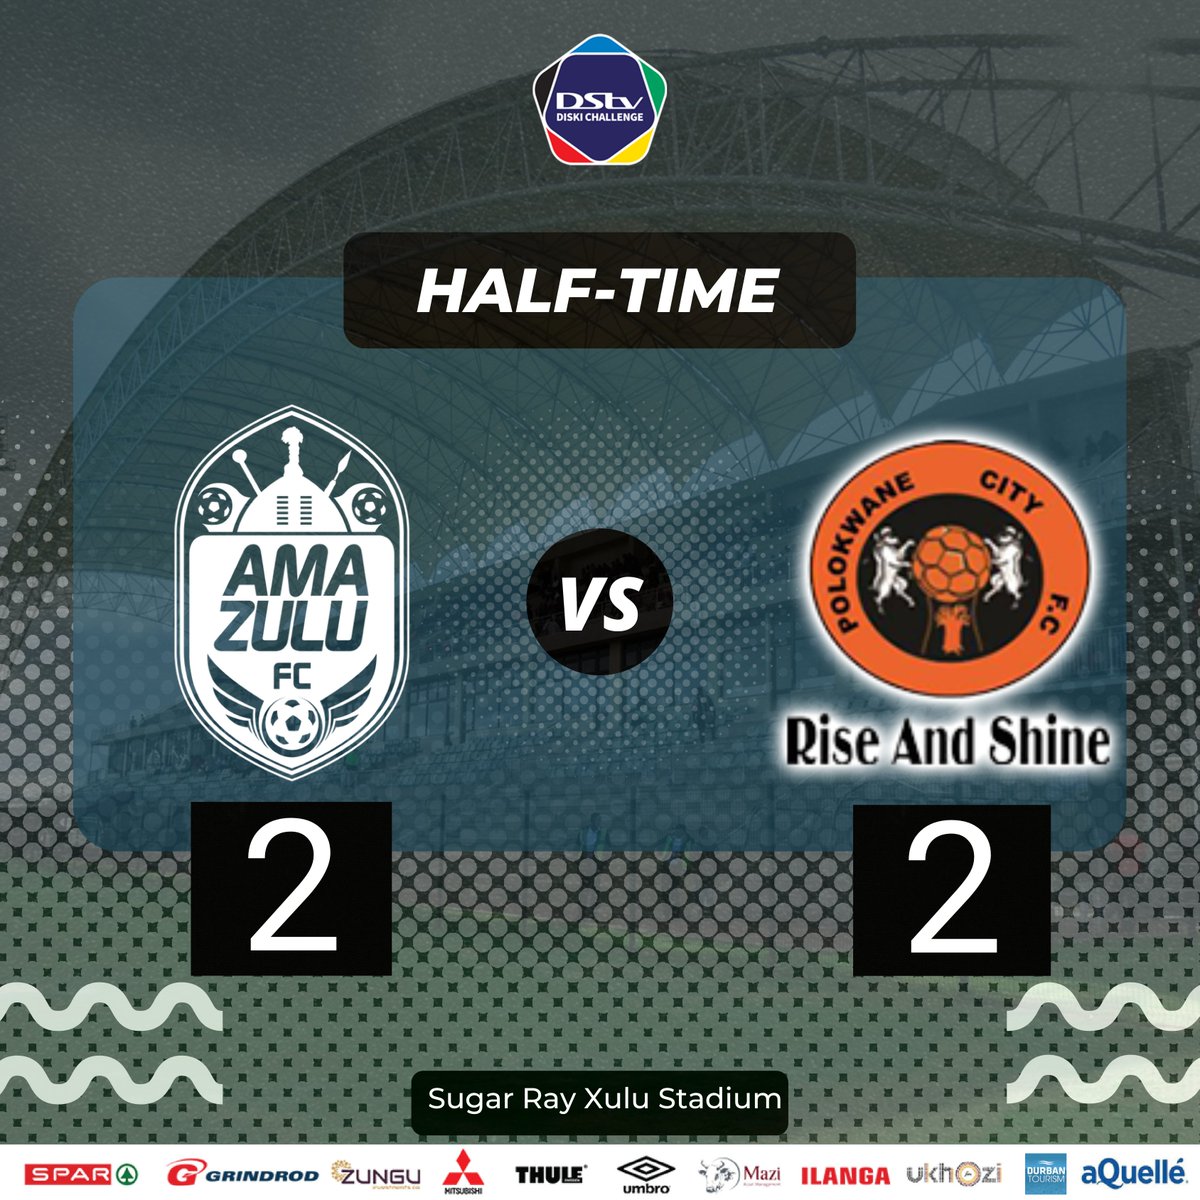 HALF-TIME ⏰ | #DStvDiskiChallenge 🏆

Usuthu fought their way back from two goals down to make matters level going into the tunnel.

#AmaZuluFC 2⃣ ➖ 2⃣ Polokwane

#Asidlali
#HebeUsuthu
#UsuthuTogether